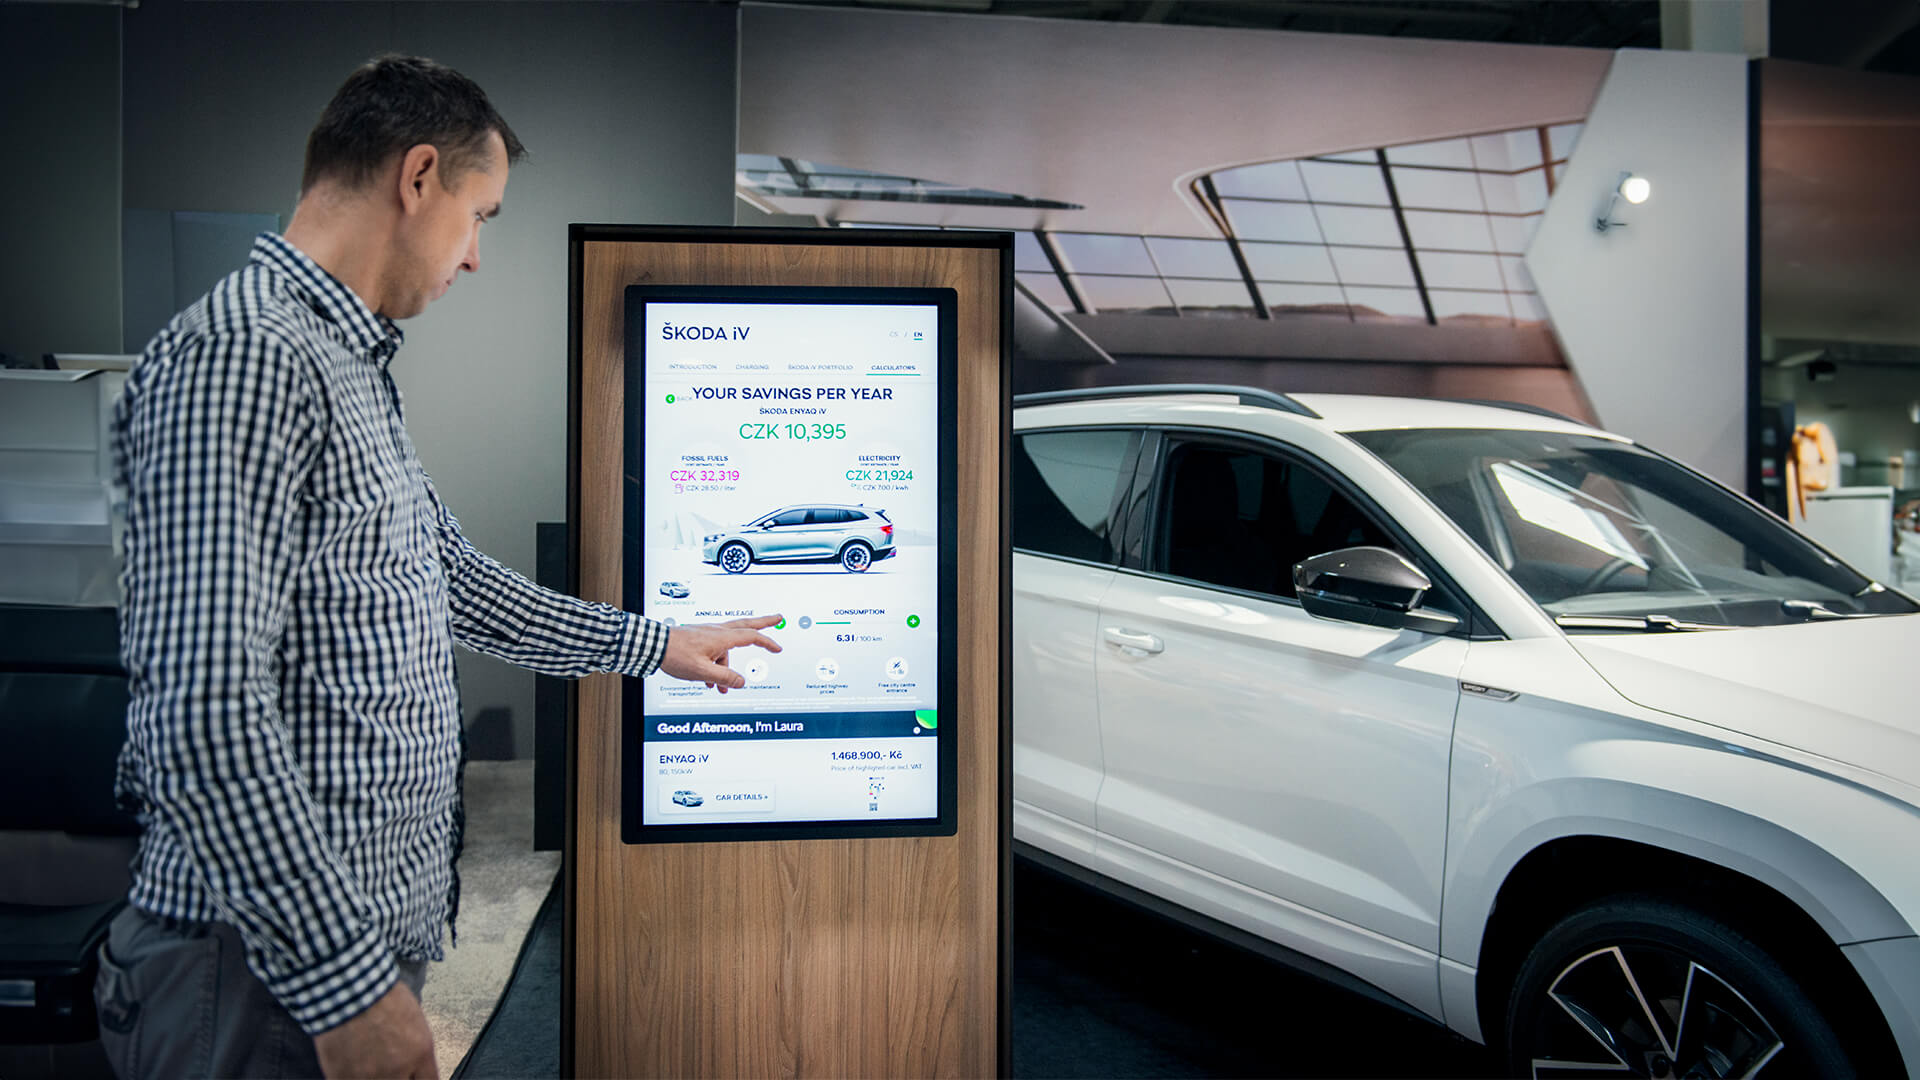  an interactive screen showing the car features at a showroom